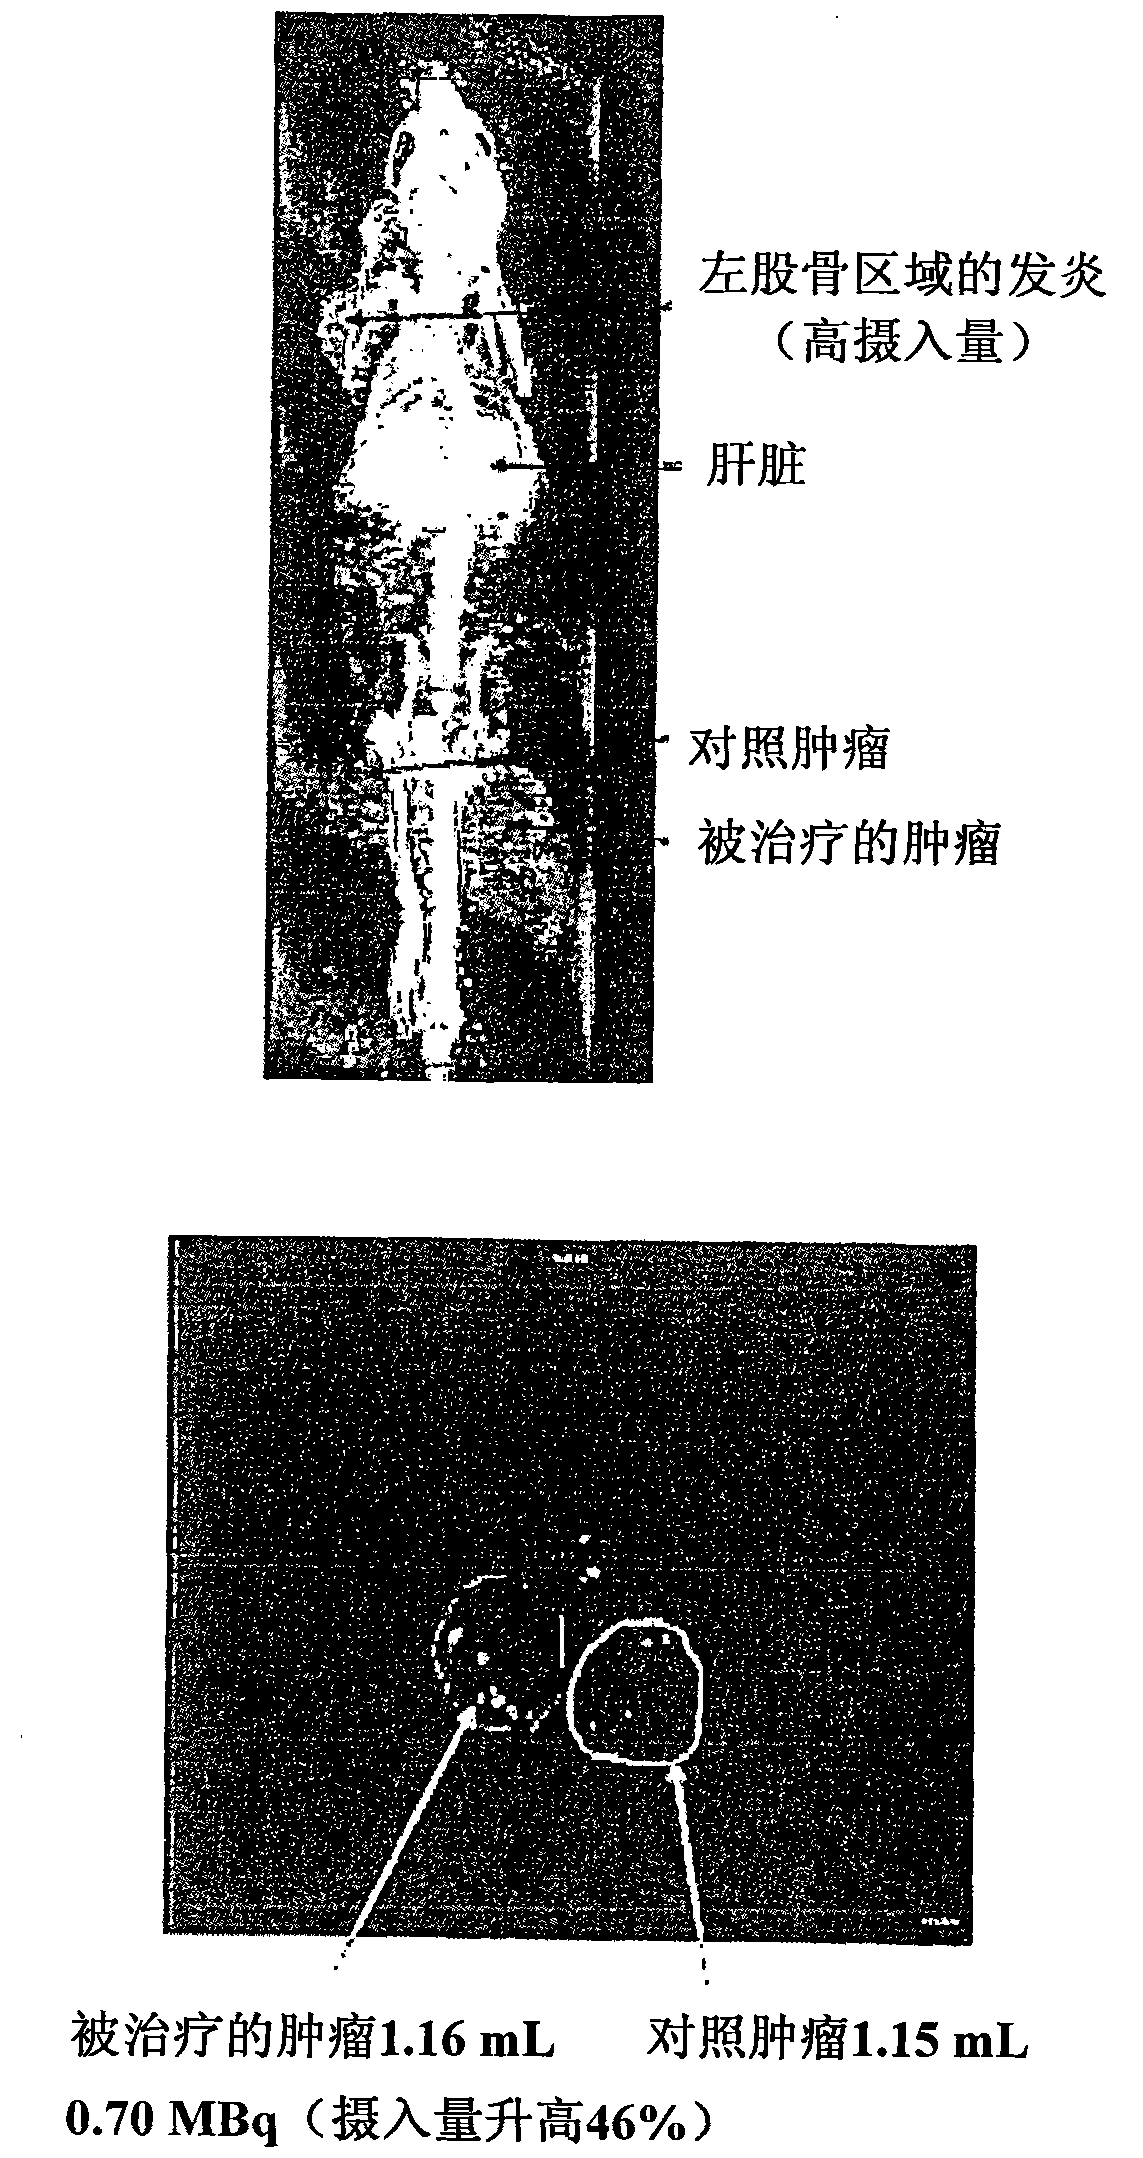 Portable radiofrequency hyperthermia device with flexible treatment electrode for electric field capacitive coupled energy transfer